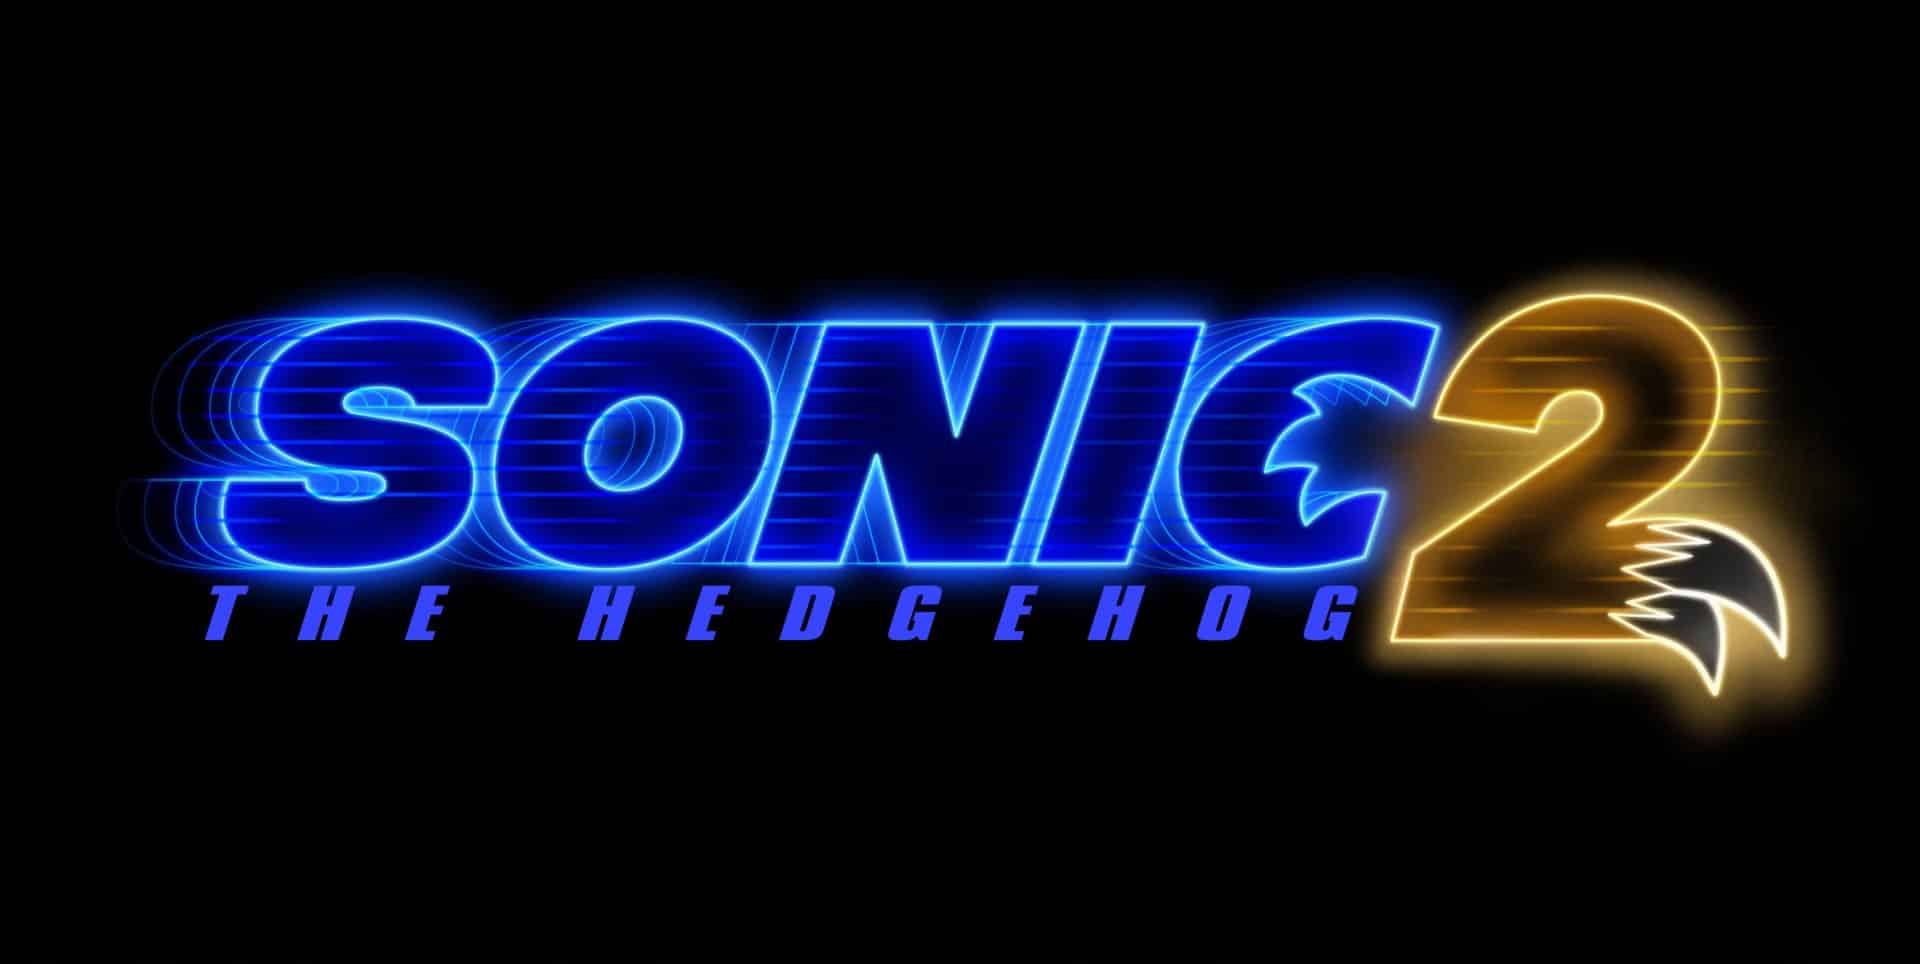 Sonic the Hedgehog 2 has been Unleashed